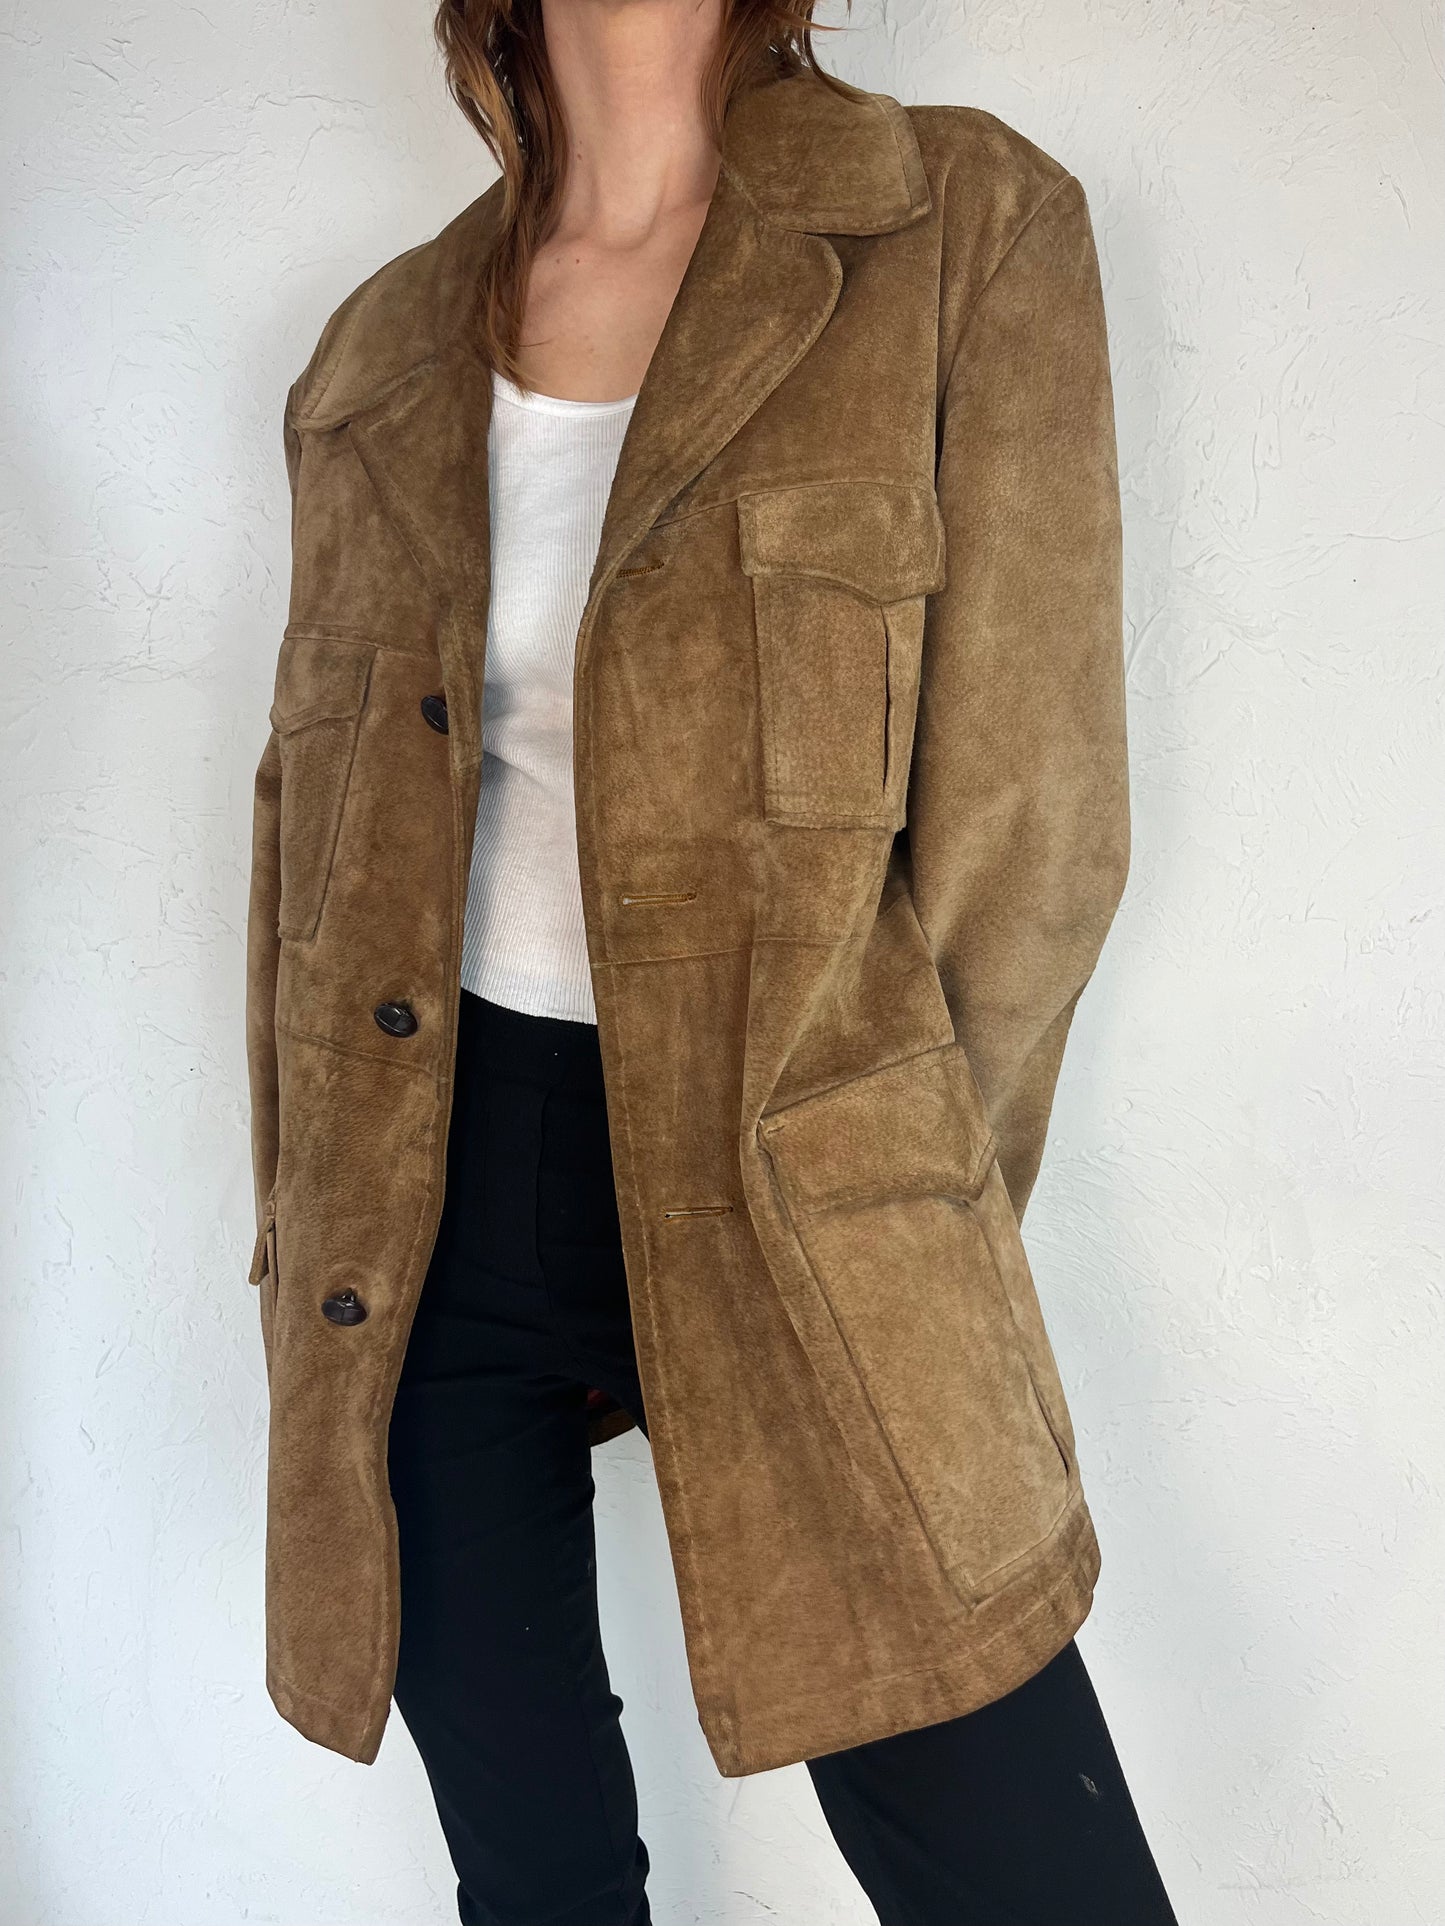 80s Thick Suede Leather Chore Jacket / Large